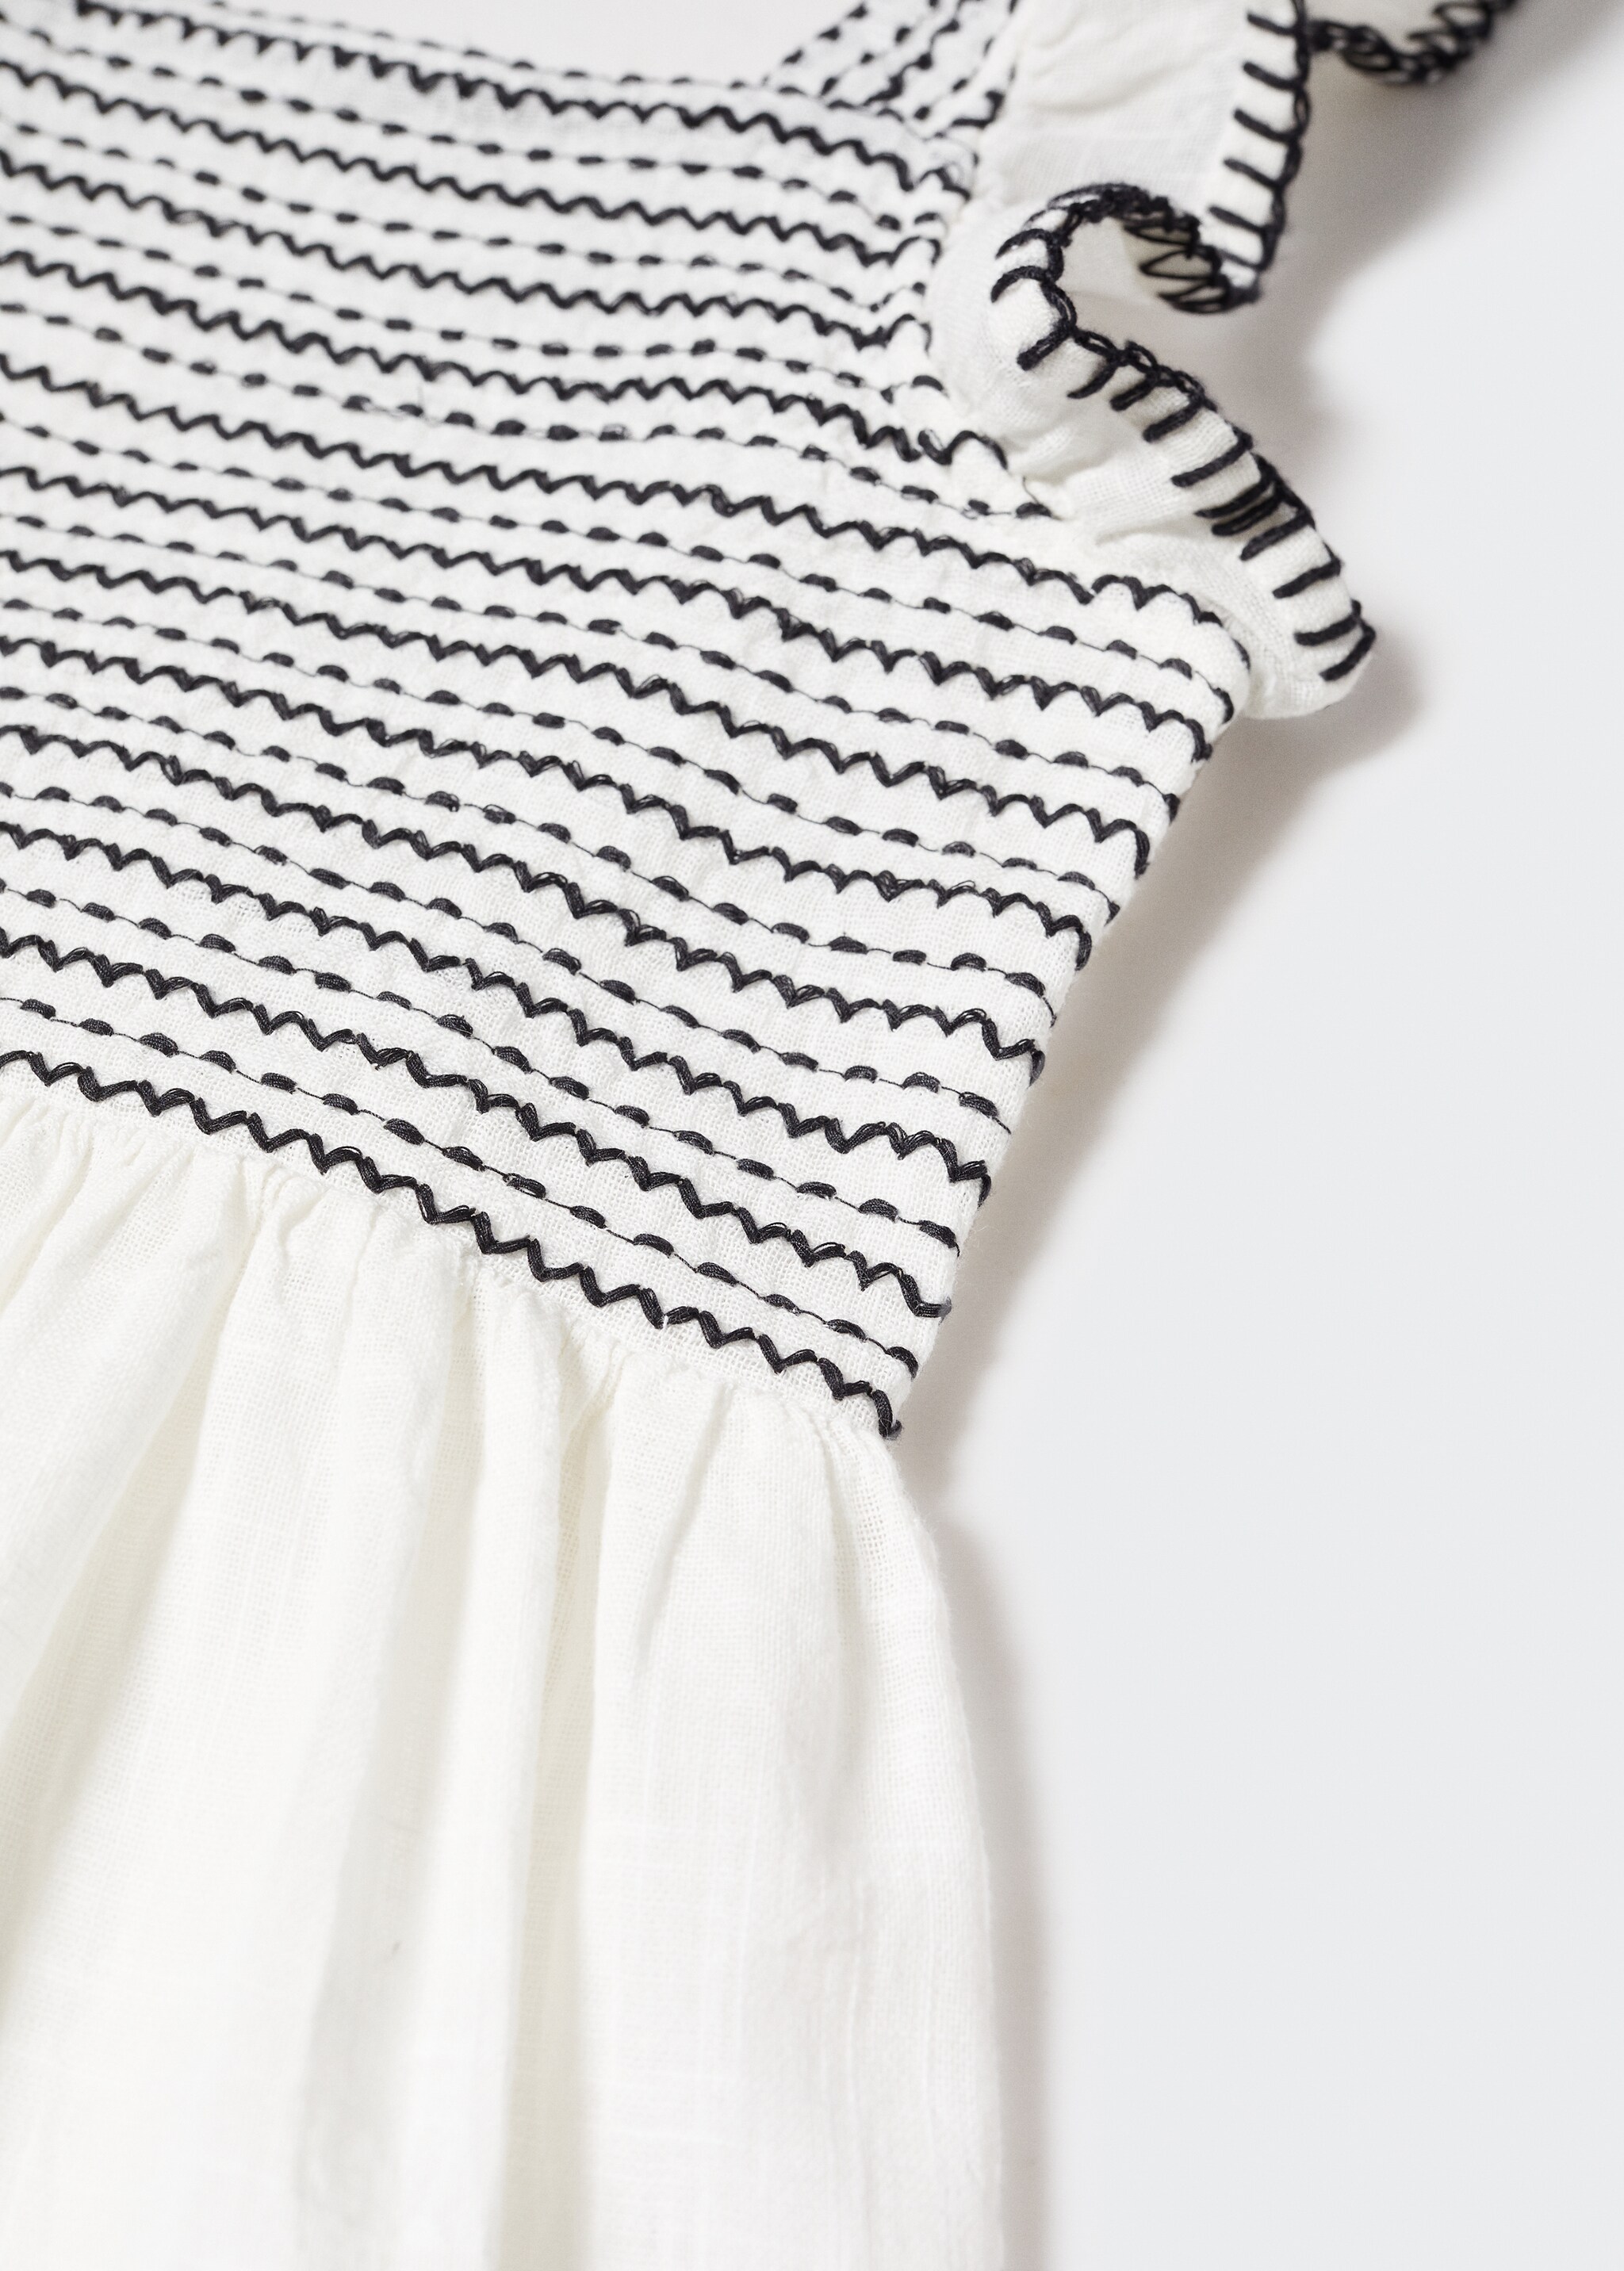 Textured cotton dress - Details of the article 8